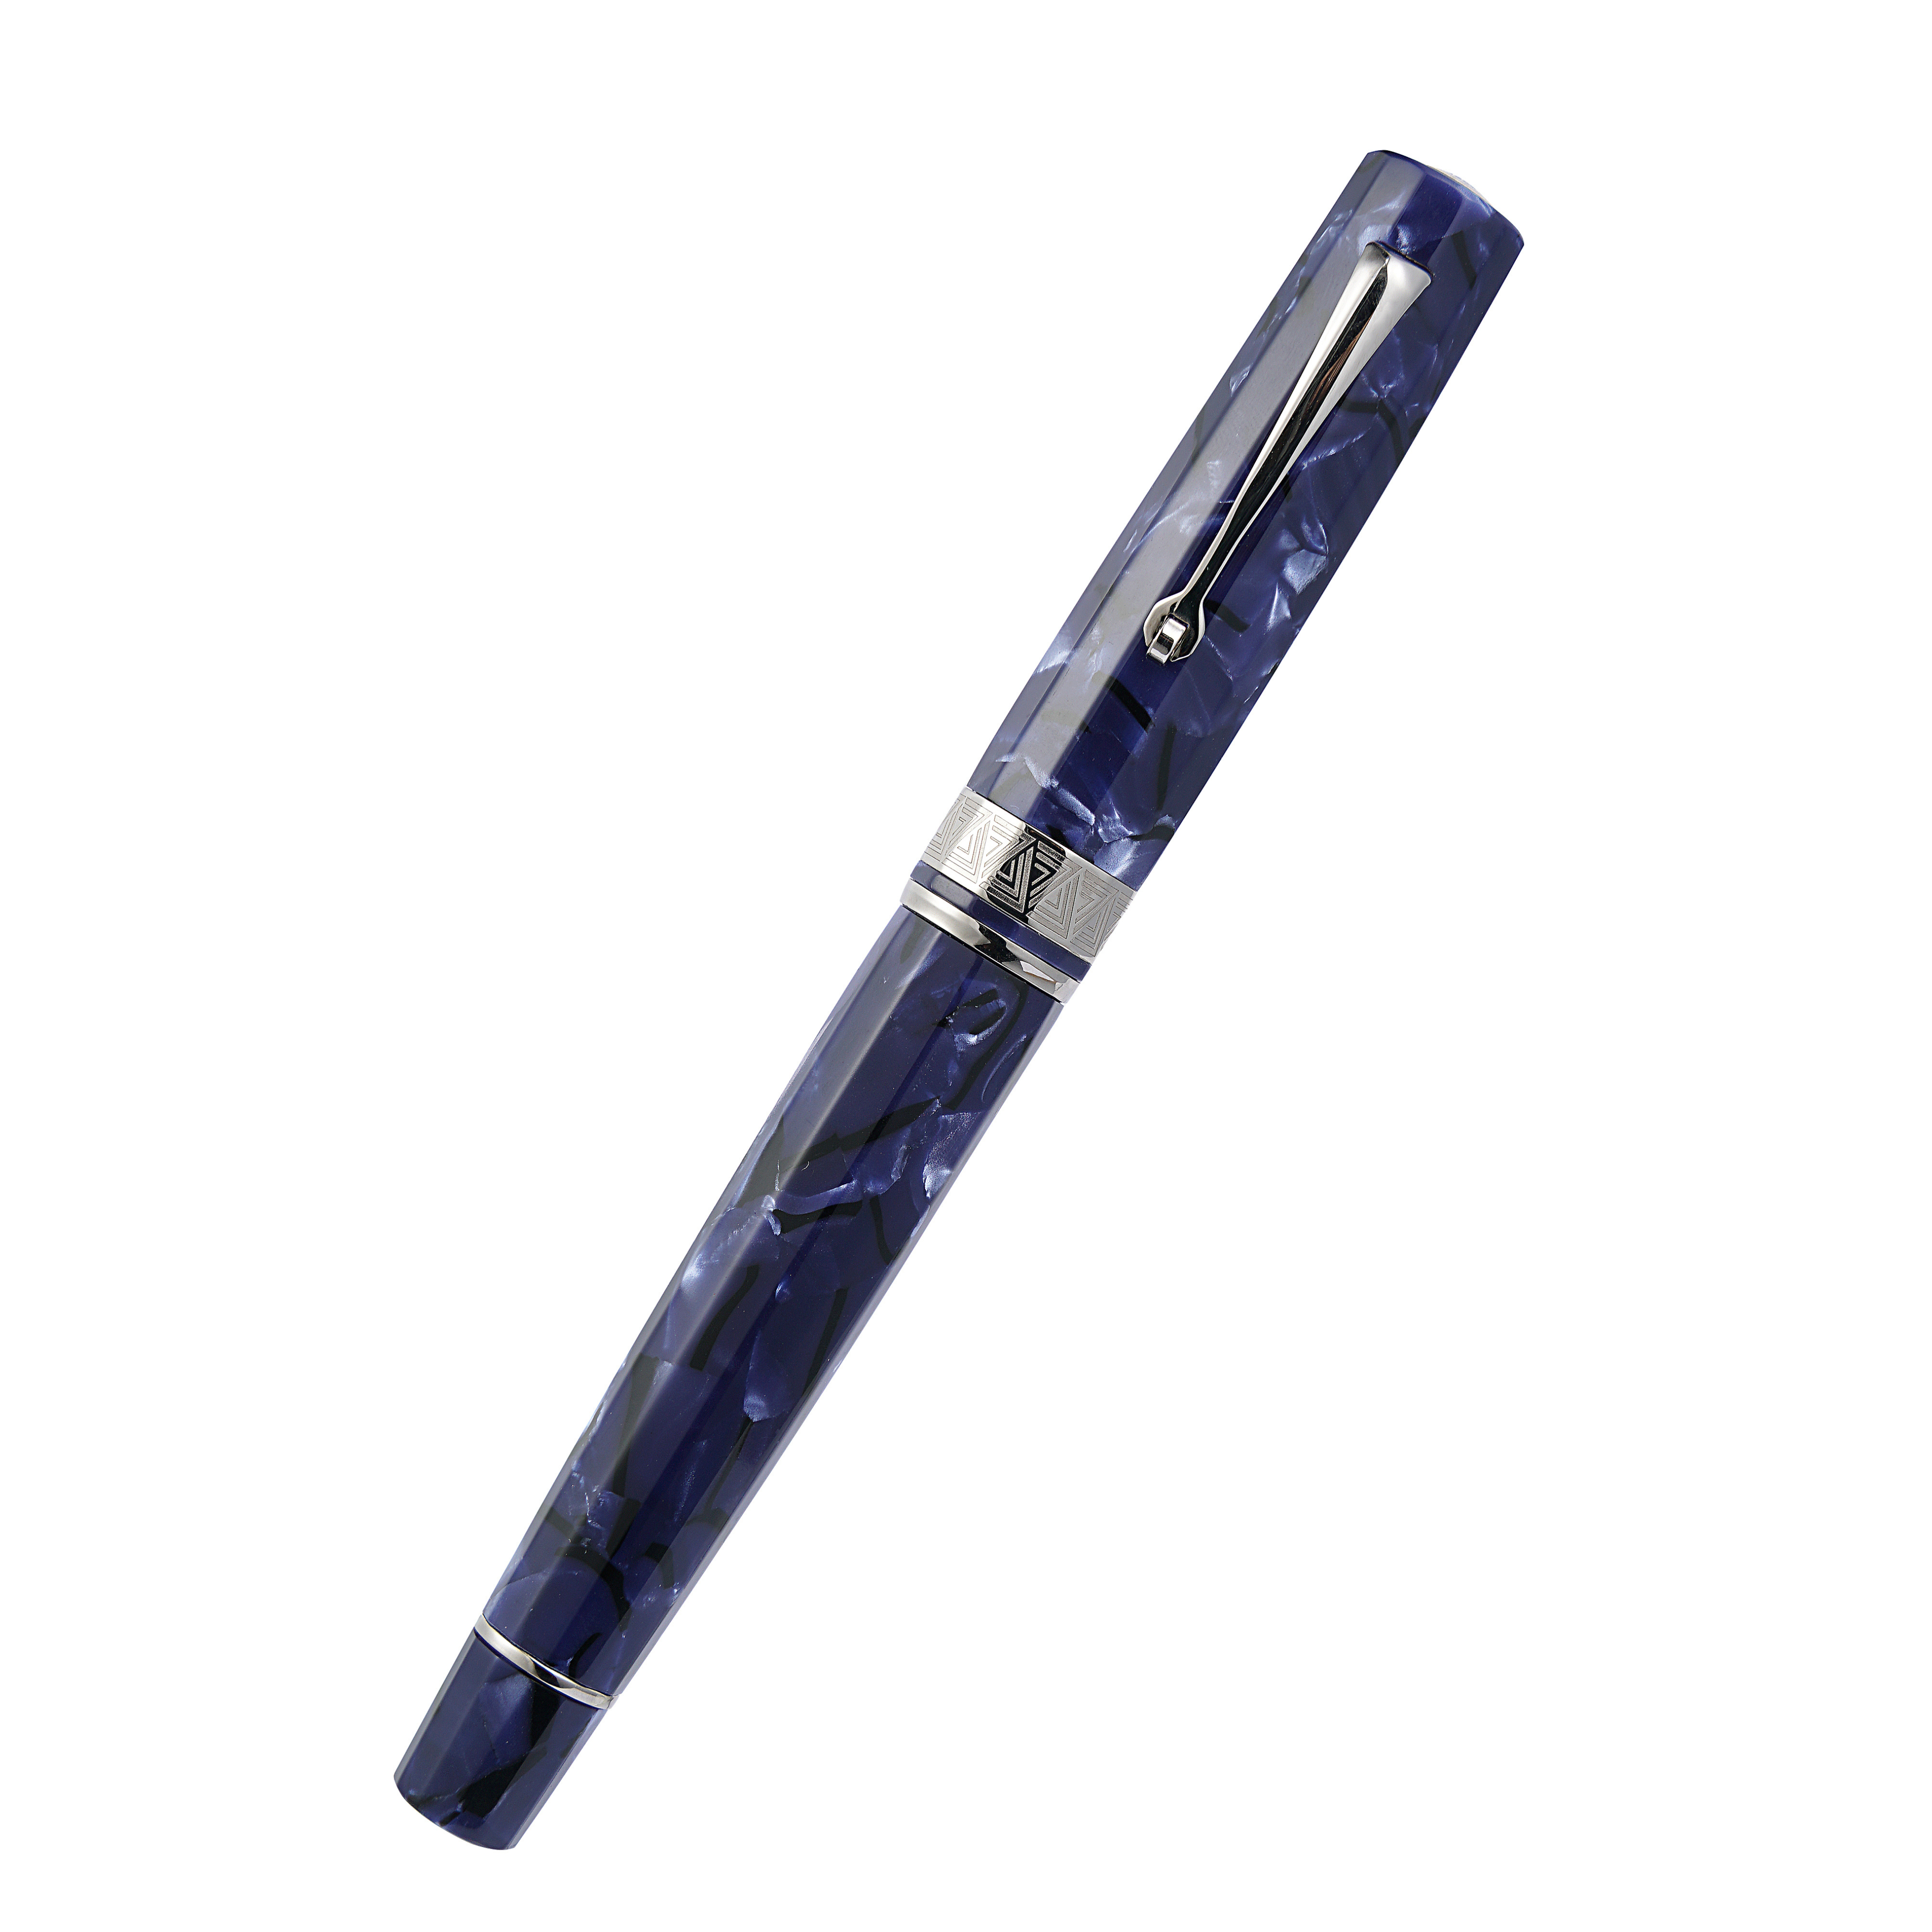 OMAS Paragon Fountain Pen in Blue Royale with Silver Trim